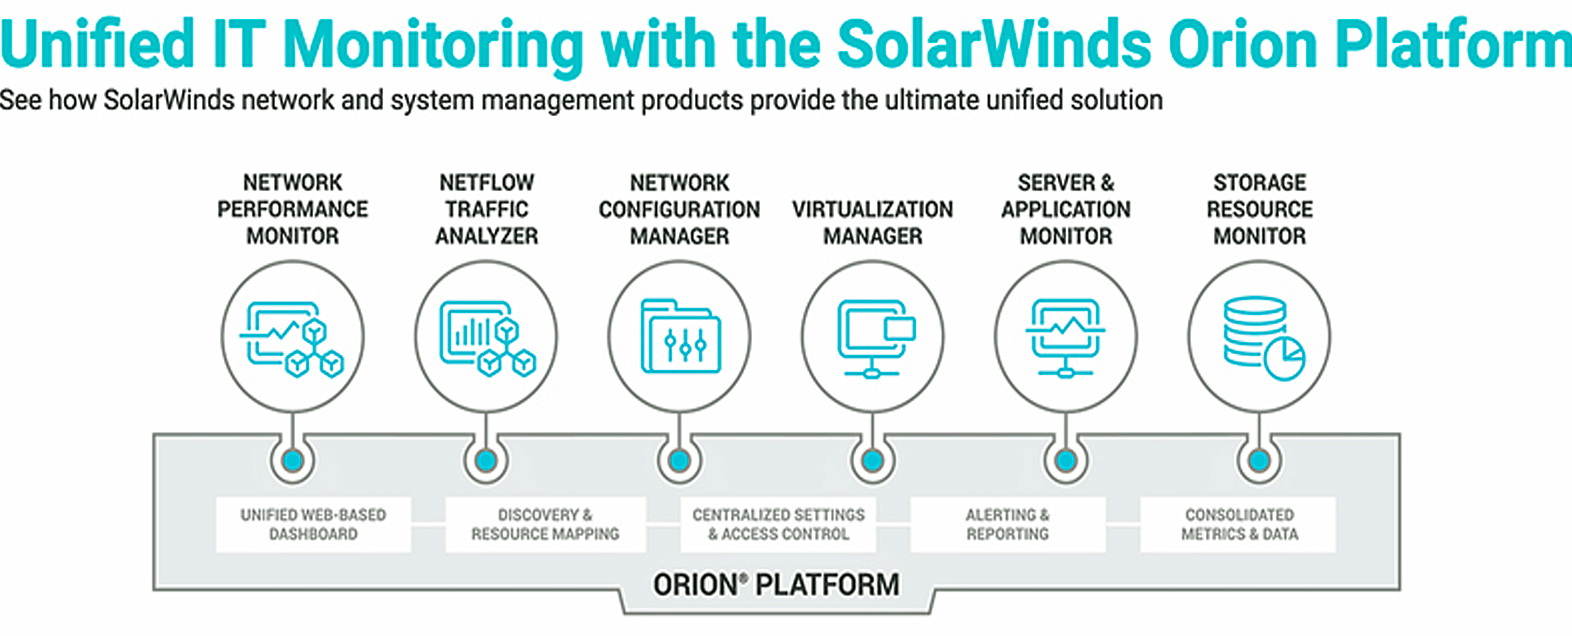 SolarWinds ® Orion ® Platform is trusted by 425 of the Fortune 500 ® companies to monitor, visualize, and analyze the performance of networks, applications, systems, and databases on-premises, in a hybrid environment, or in the cloud.